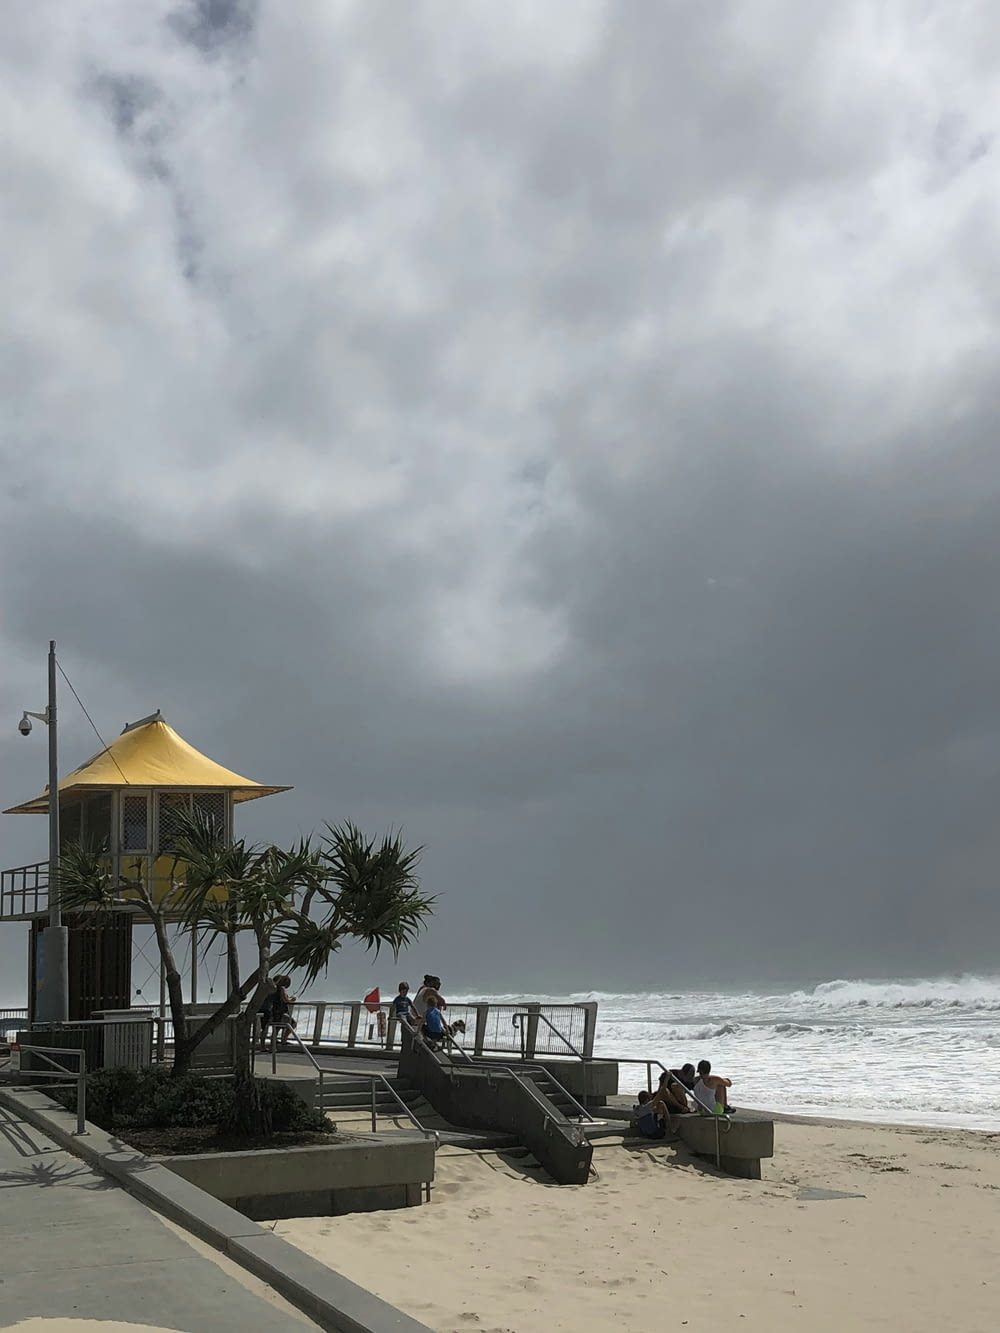 a lifeguard station on the beach with a cloudy sky